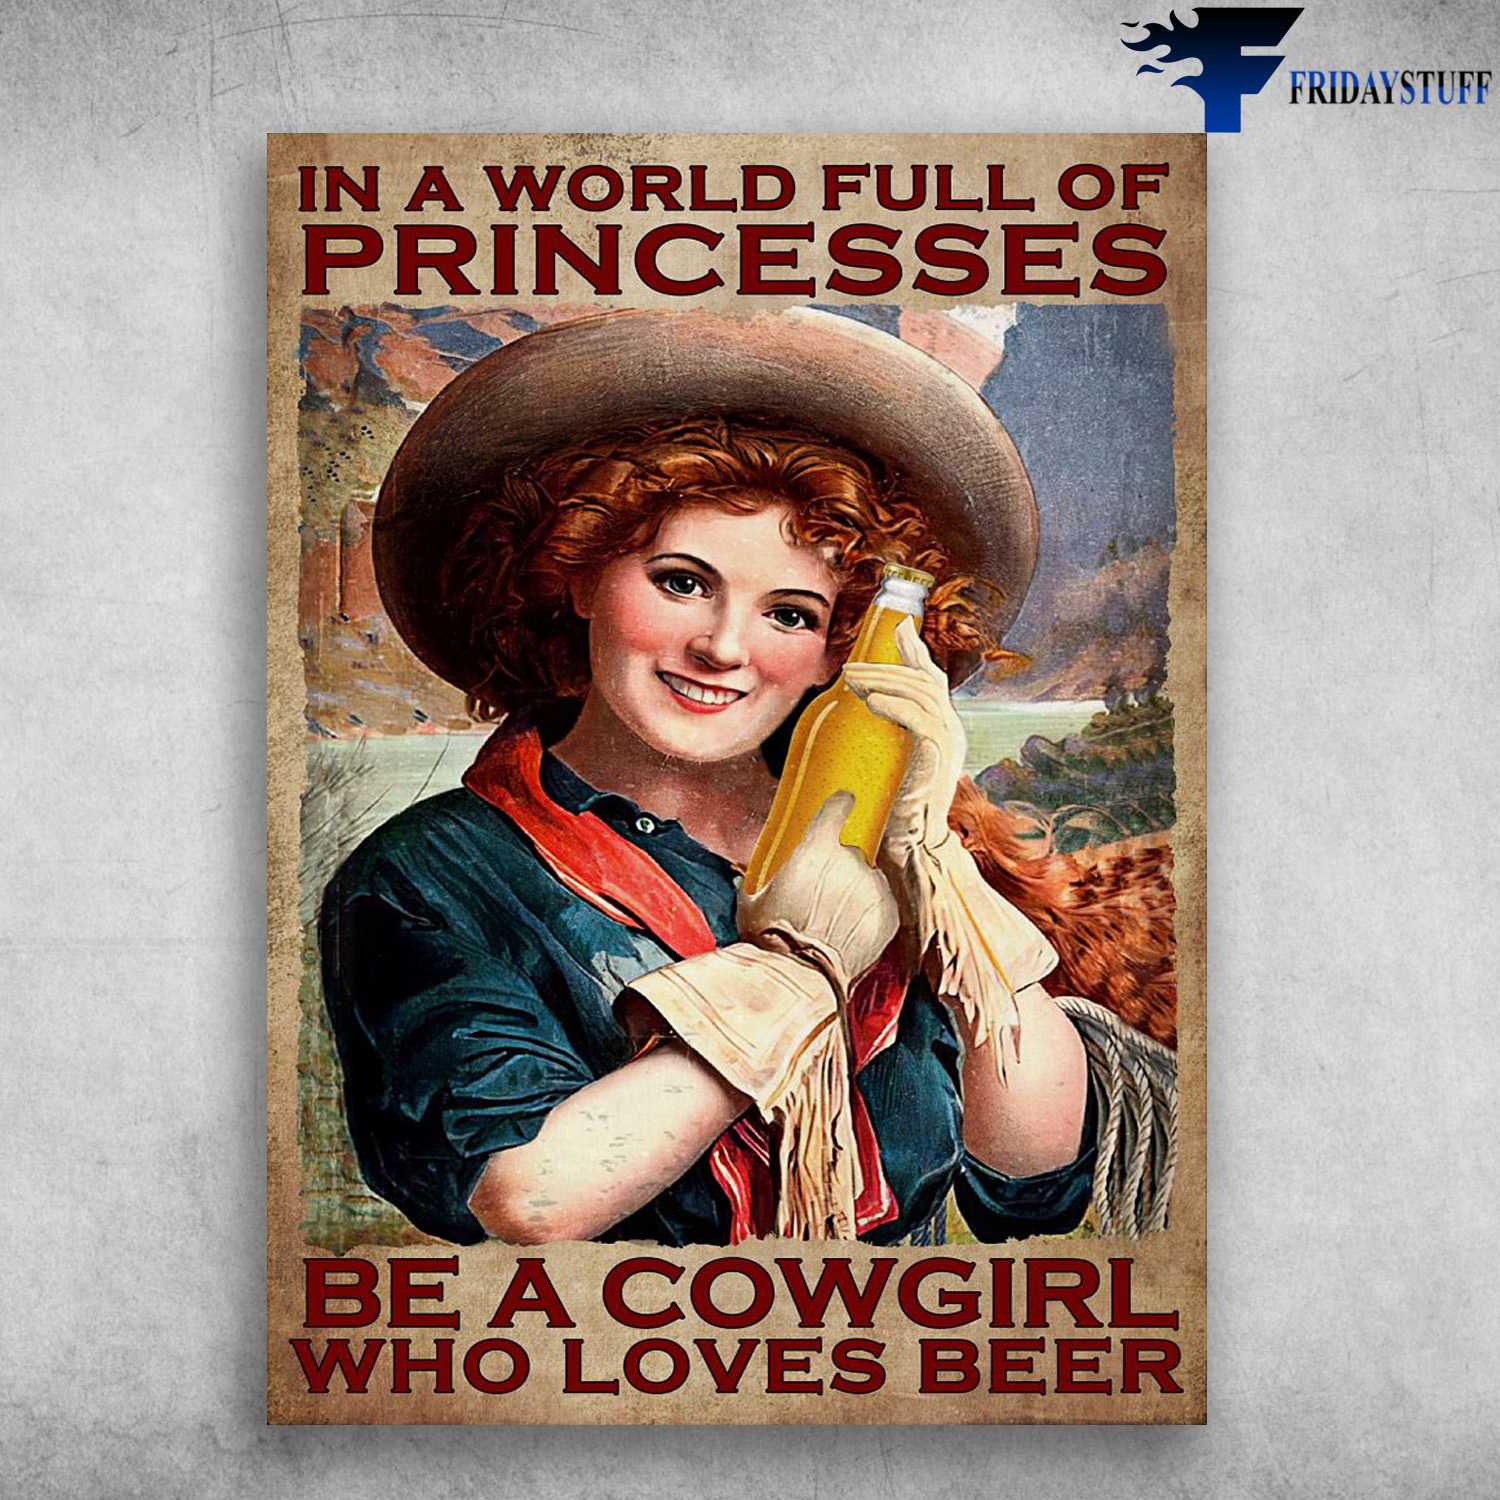 Cowgirl Loves Beer - In A World Full Of Princesses, Be A Cowgirl, Who Loves Beer